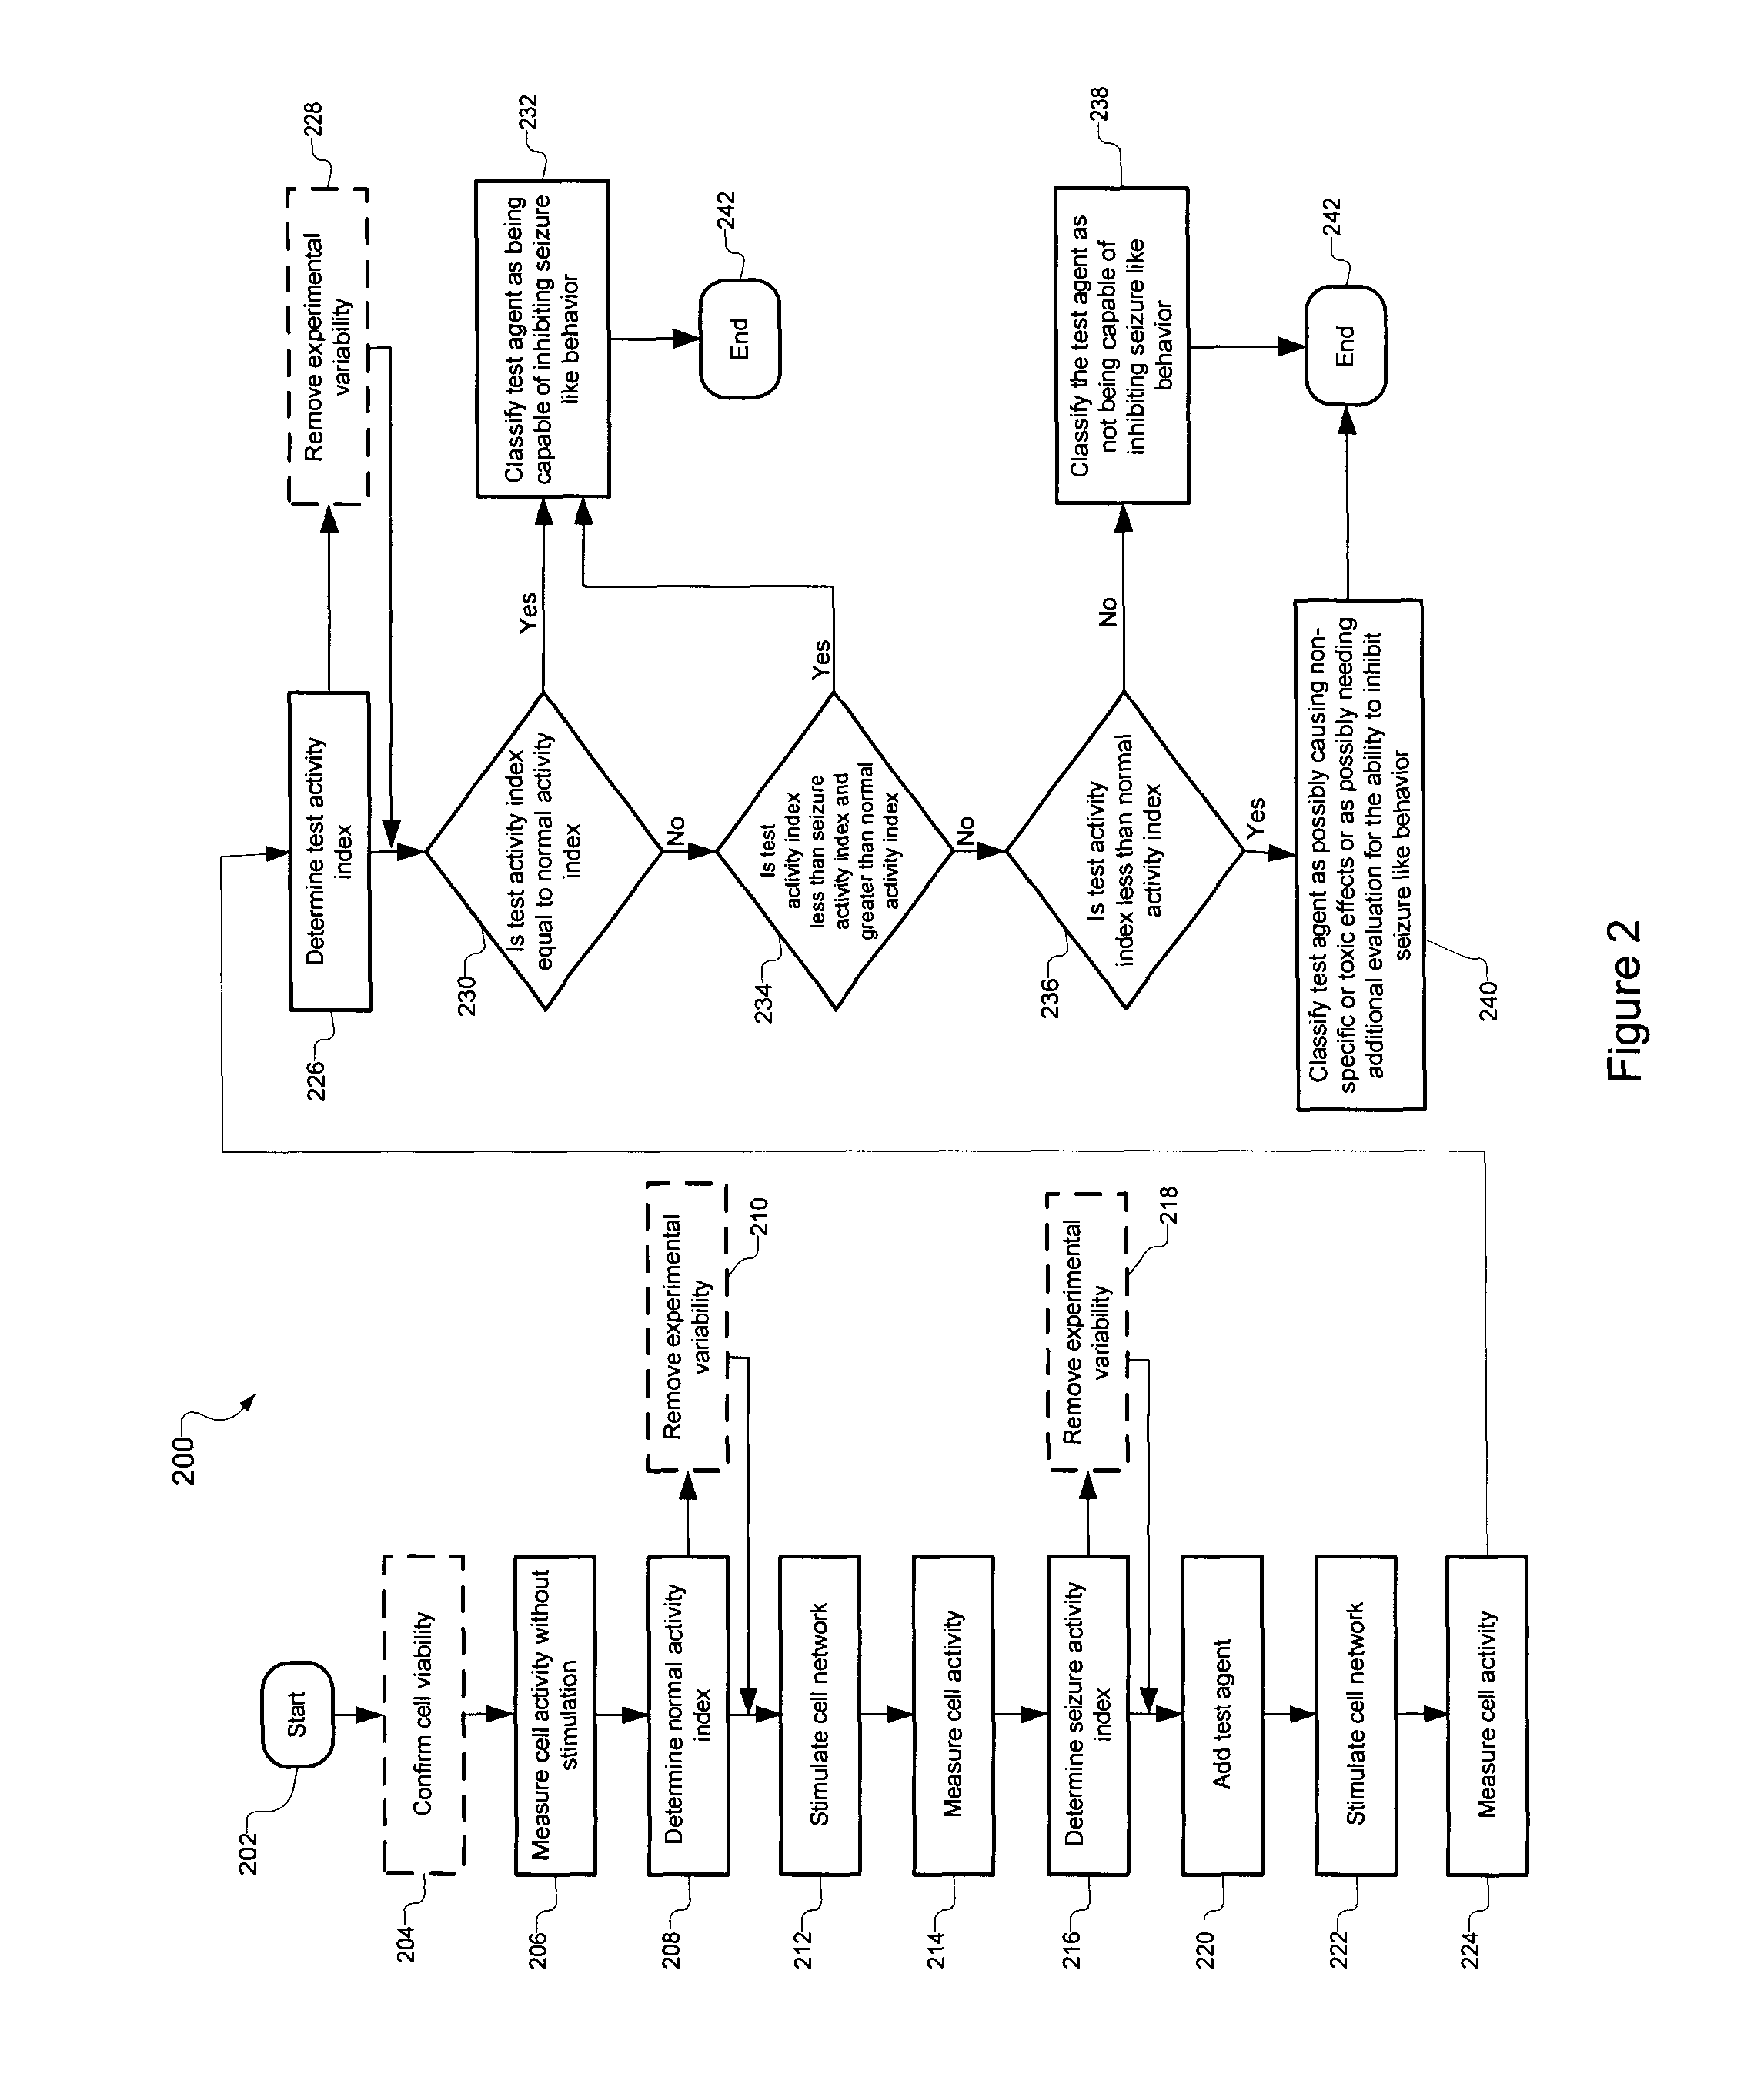 Detecting electrical activity and assessing agents for the ability to influence electrical activity